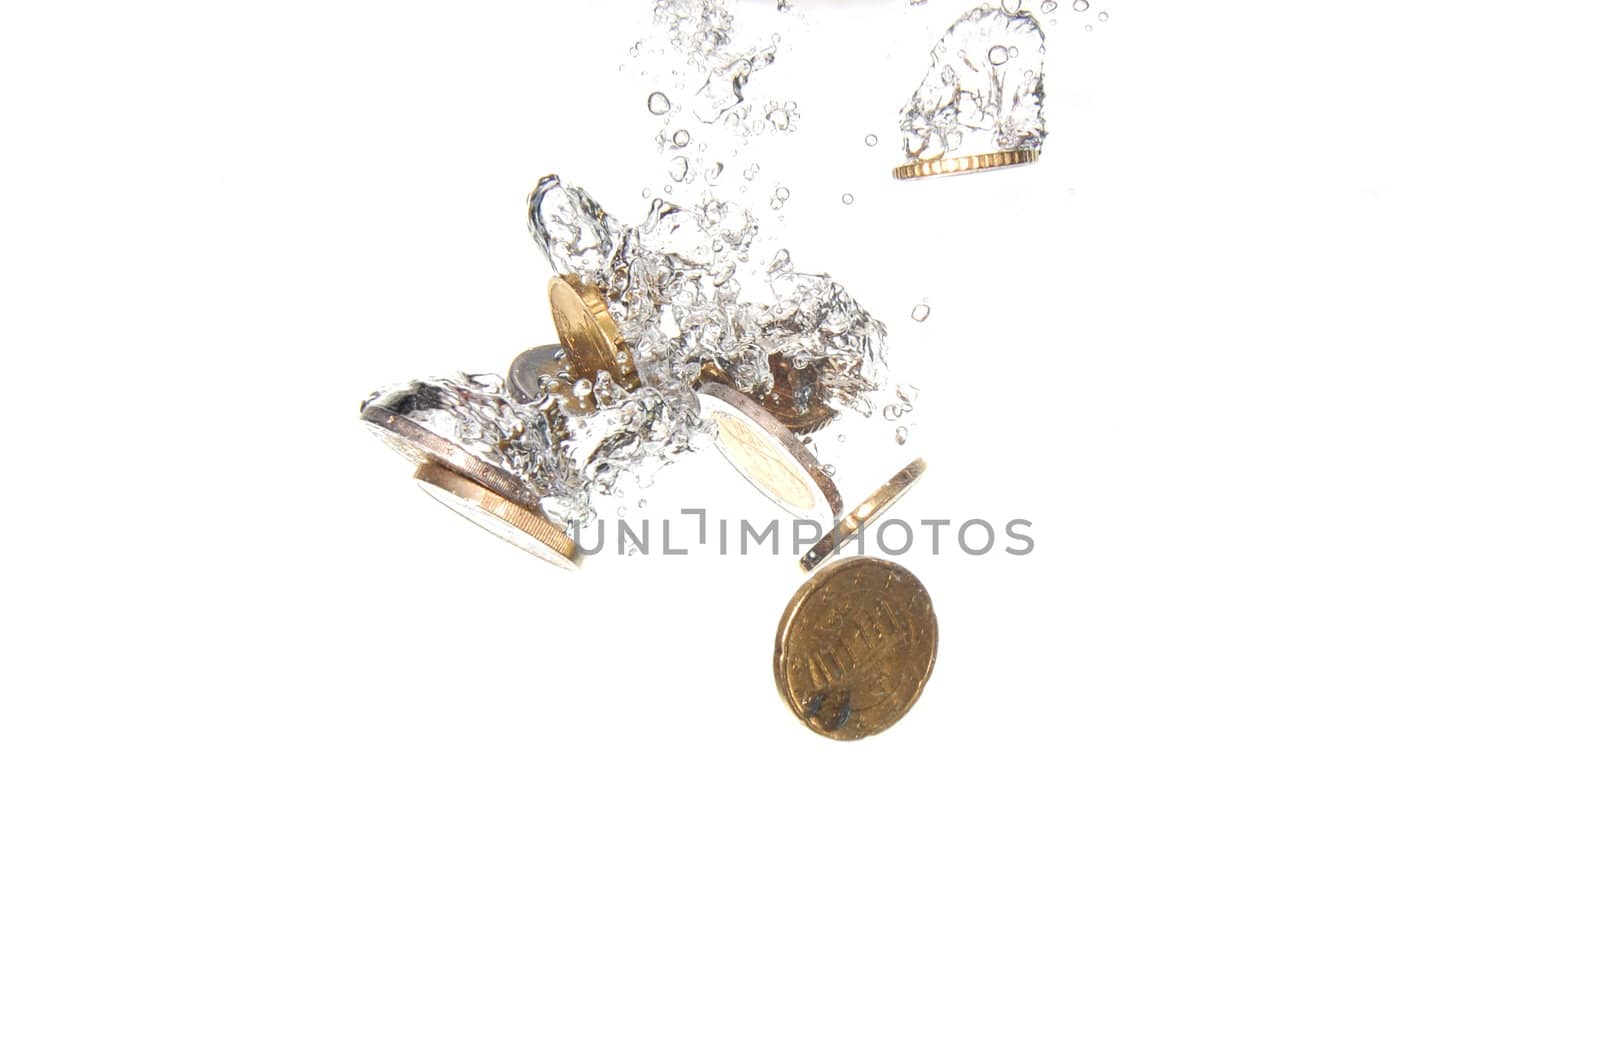 coins in water by gunnar3000